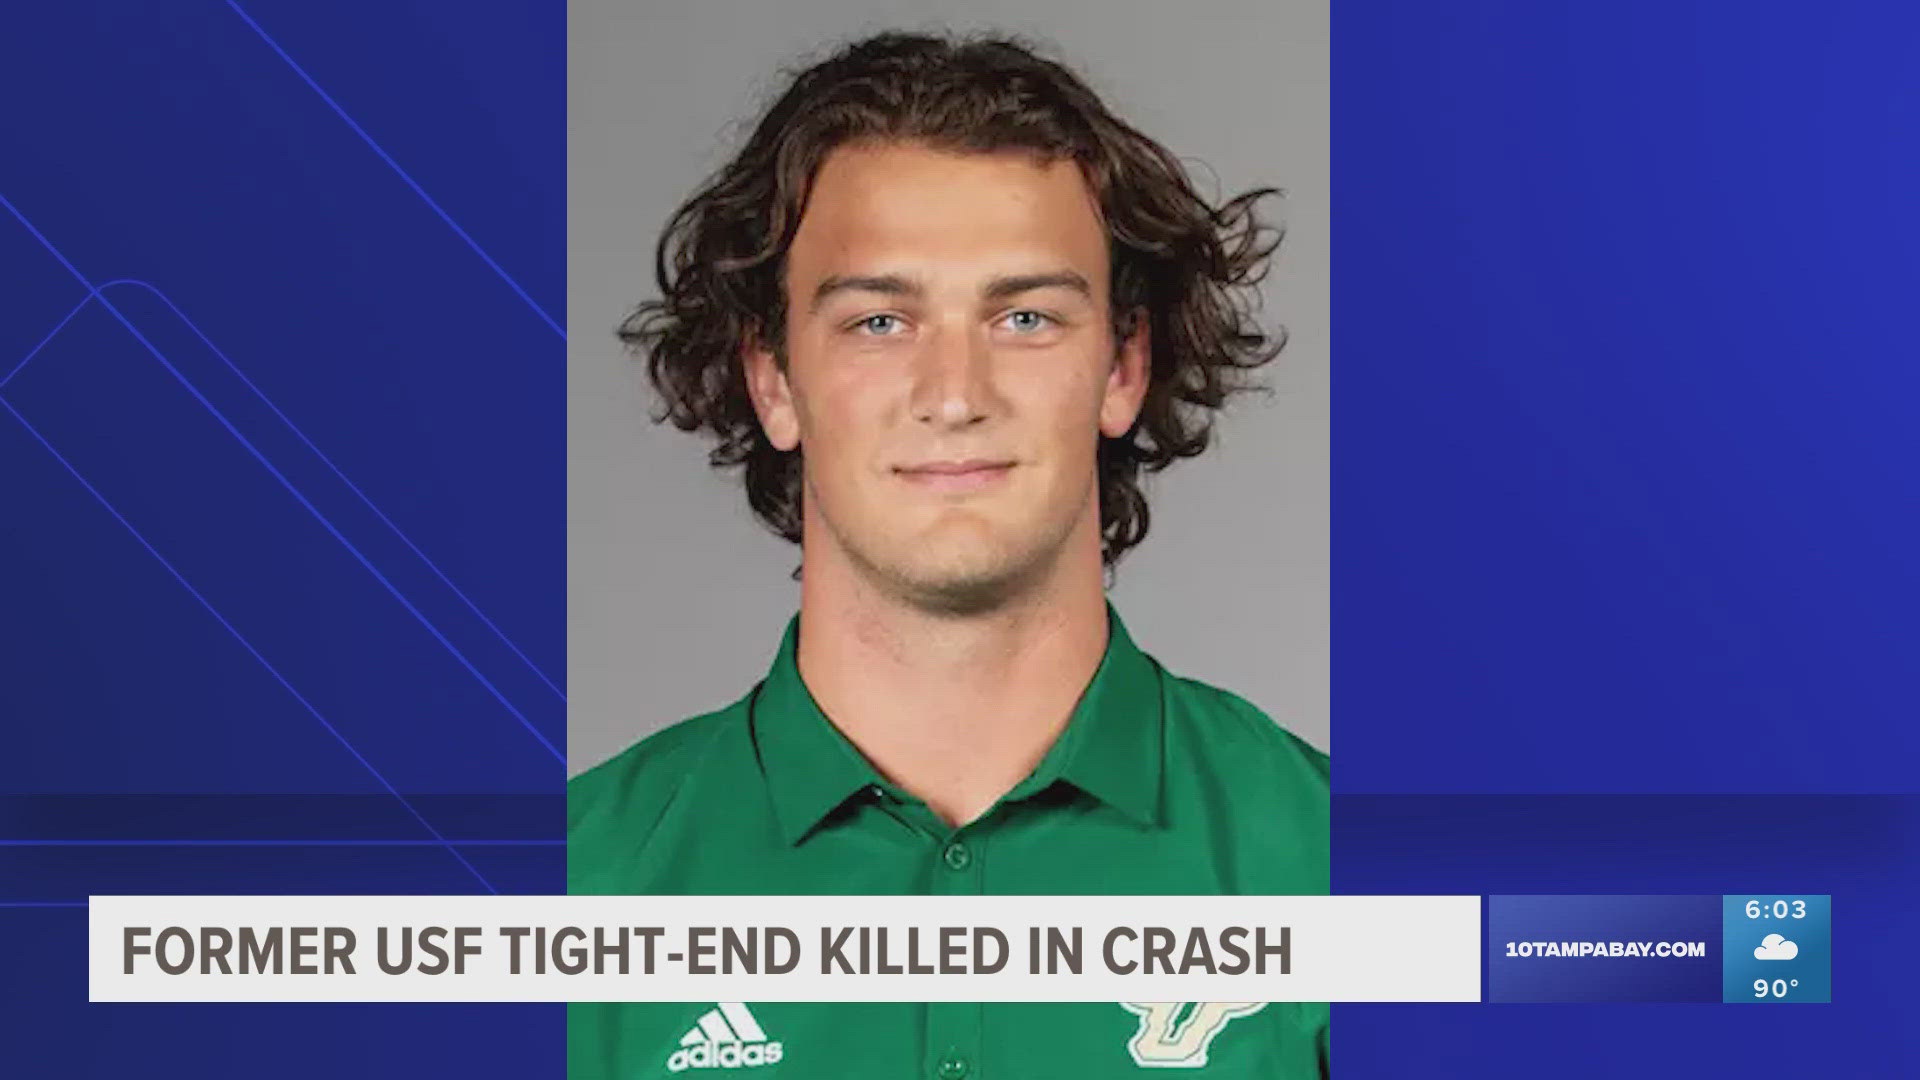 The tight end was killed after he lost control of his car on a county road in Minnesota, according to the local sheriff's office.